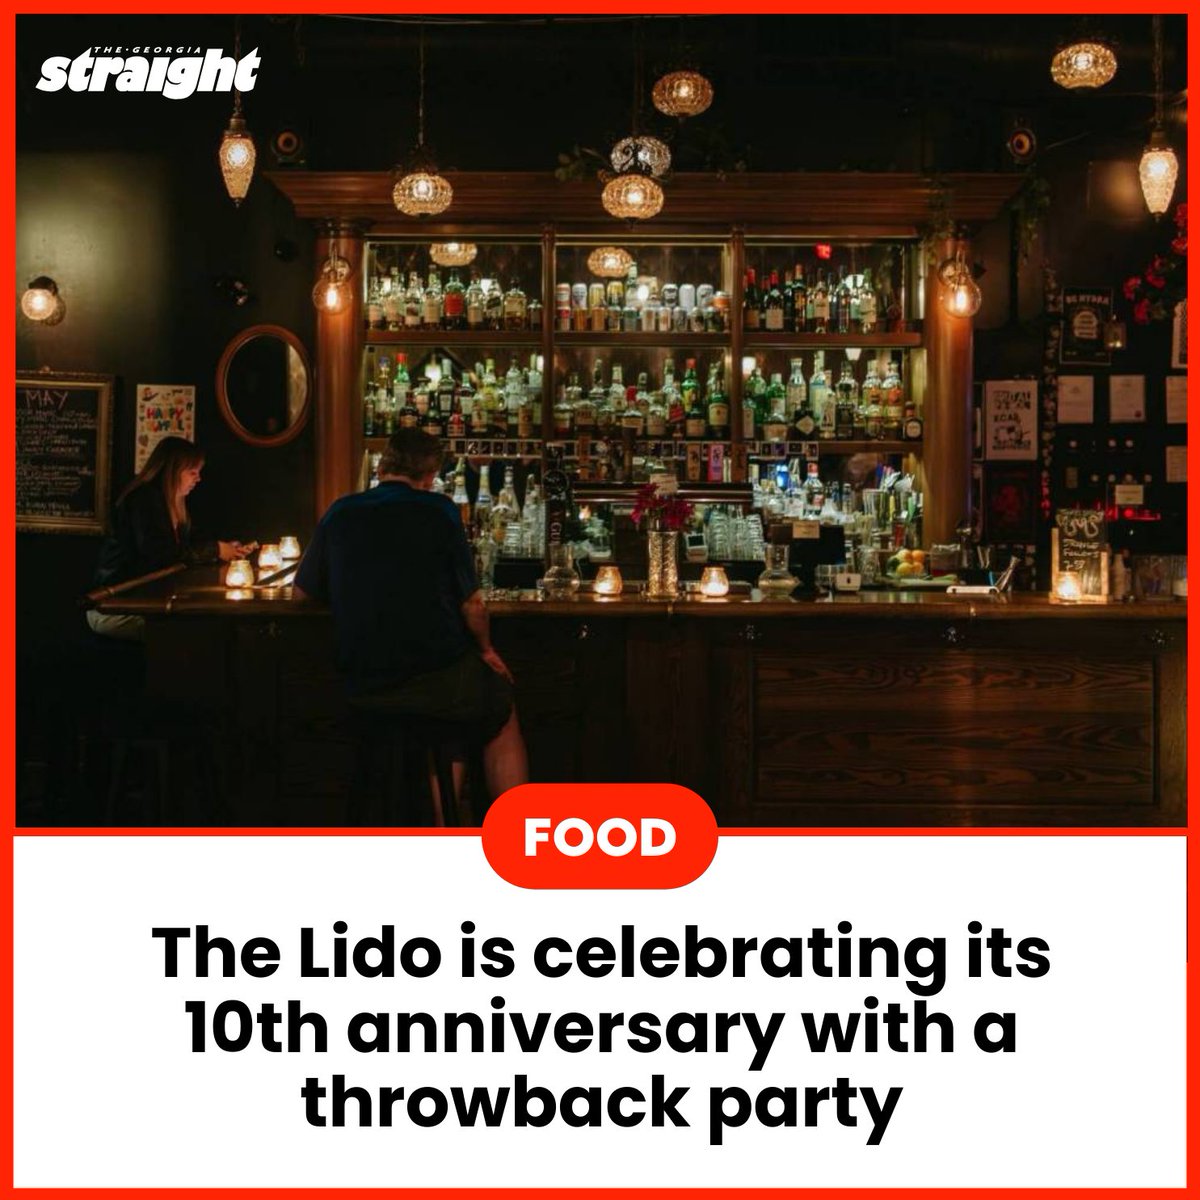 An East Van staple, The Lido is a locals’ watering hole known for striking the right balance of being a dive bar that is also approachable. This year, the spot celebrates 10 years in business. Learn more about the upcoming celebration: straight.com/city-culture/l…